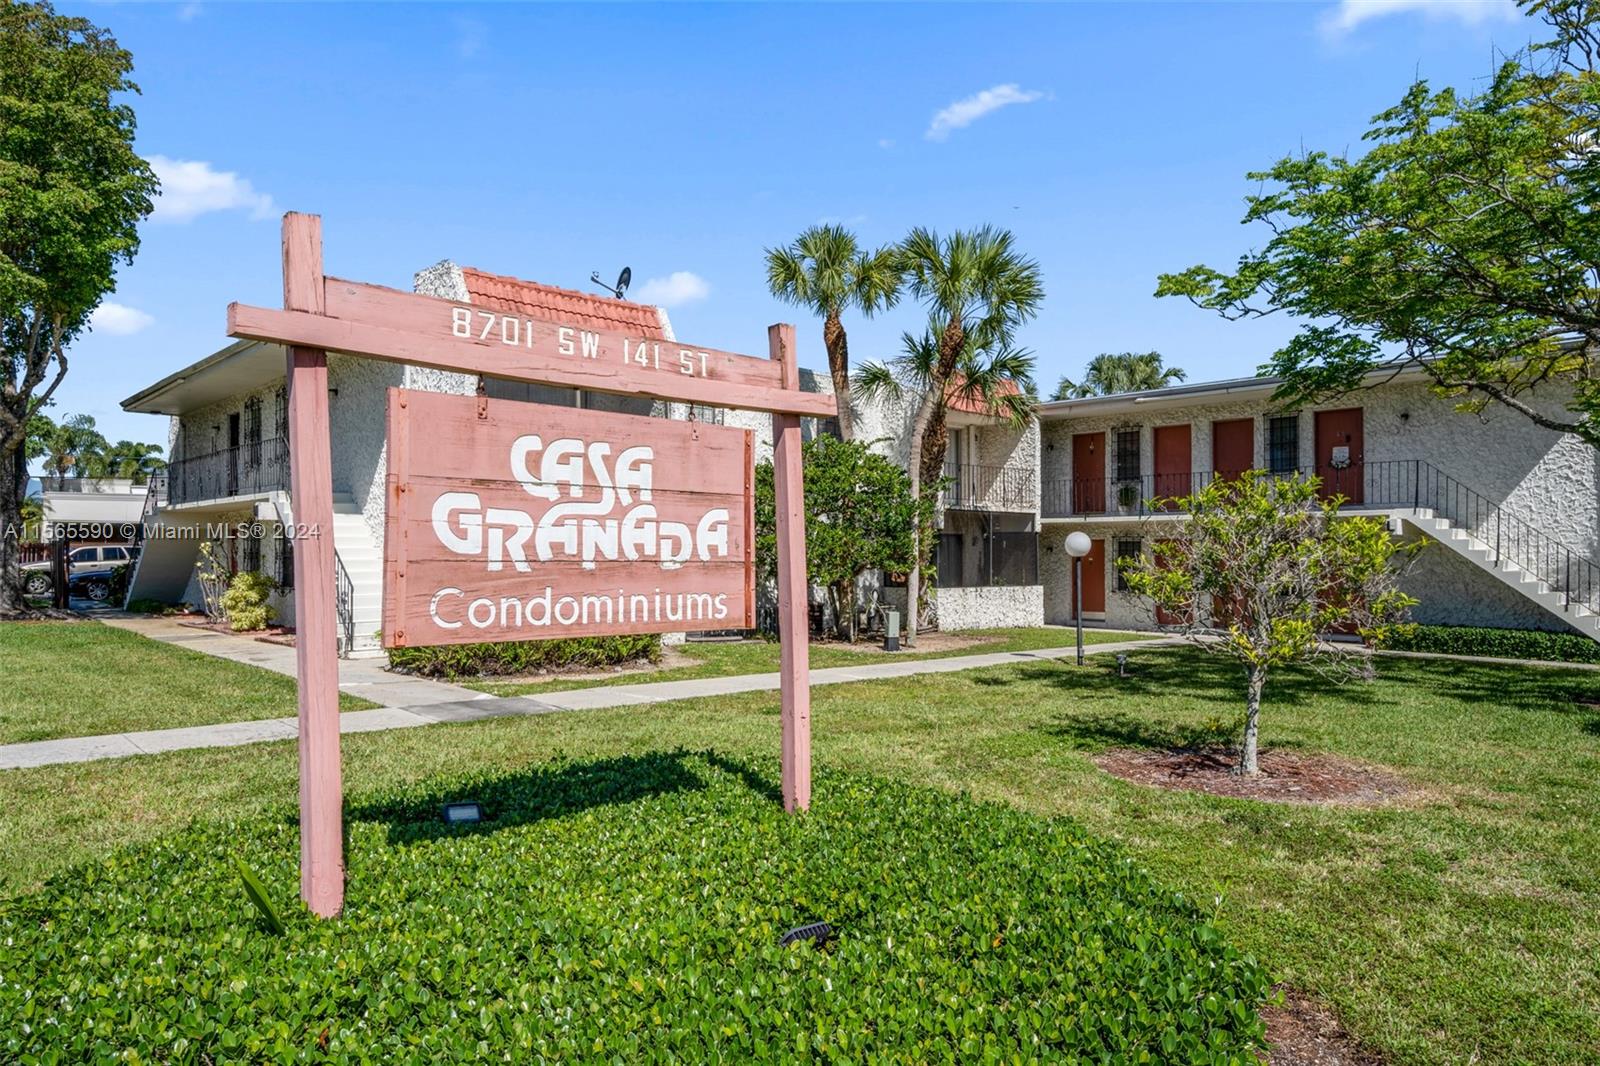 Welcome to this charming ground-level 1 bed, 1 bath residence in Casa Granada. This corner unit features an updated kitchen with granite countertops, tiled flooring, and a 2019 AC unit and condenser. This condo offers comfort and convenience. Enjoy community amenities including a pool, laundry facilities, clubhouse, and outdoor seating. Located in Palmetto Bay, it provides easy access to schools, shopping, dining, and major roadways. Don't miss out - schedule your showing today!